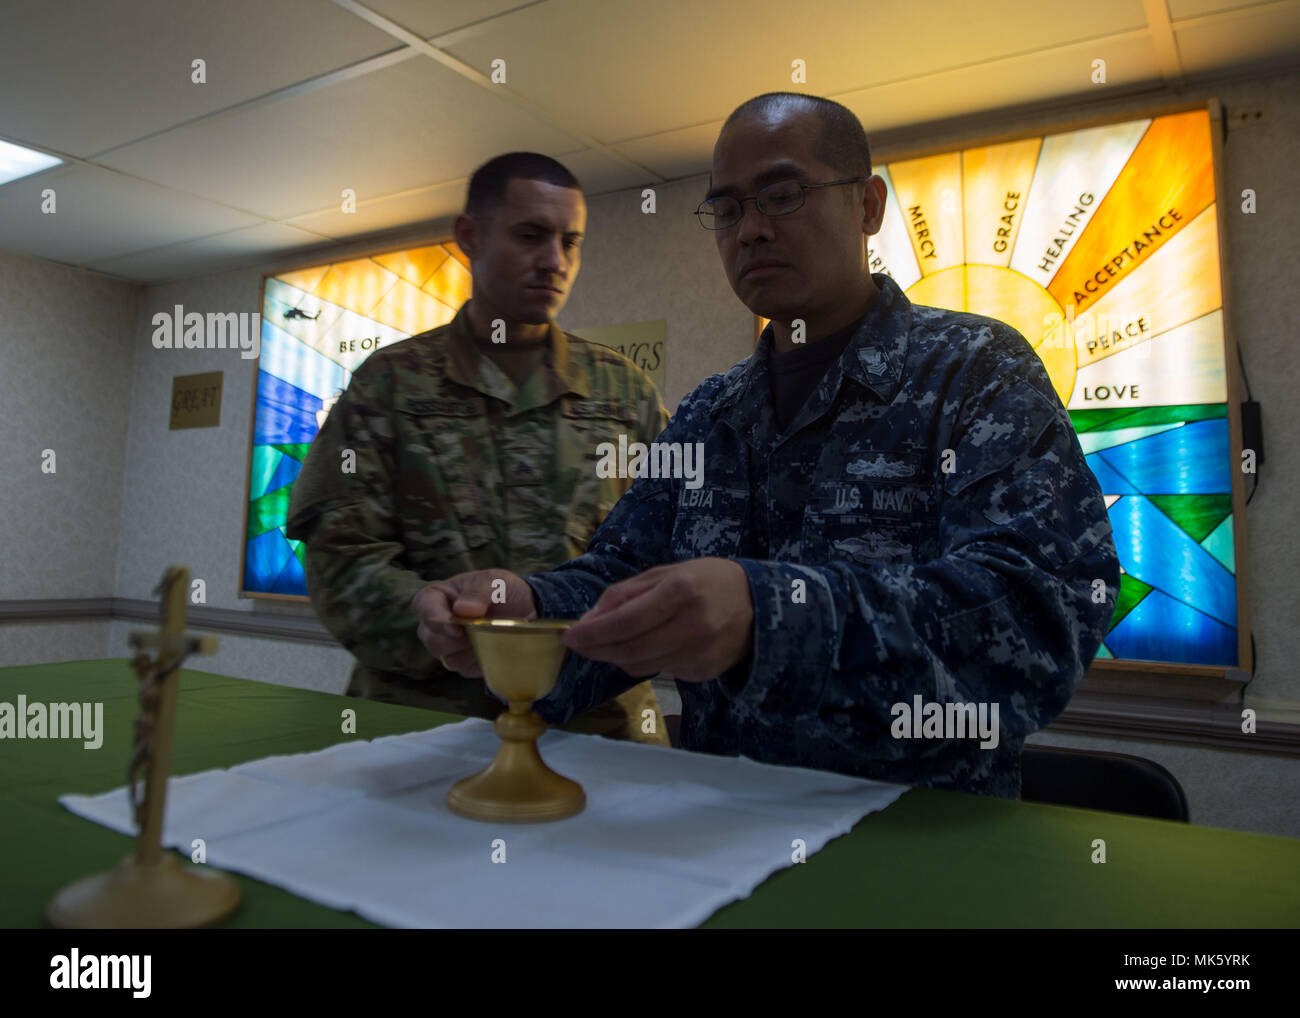 171109-N-MU198-003 SAN JUAN, Puerto Rico (Nov. 9, 2017) Religious Program Specialist 1st Class Adonis Albia (right) and Sgt. Juan Rios prepare the chapel aboard the Military Sealift Command hospital ship USNS Comfort (T-AH 20) for Catholic mass. Comfort is moored pier side in San Juan, Puerto Rico, to provide humanitarian relief. The Department of Defense is supporting the Federal Emergency Management Agency, the lead federal agency, in helping those affected by Hurricane Maria to minimize suffering and is one component of the overall whole-of-government response effort. (U.S. Navy photo by Ma Stock Photo